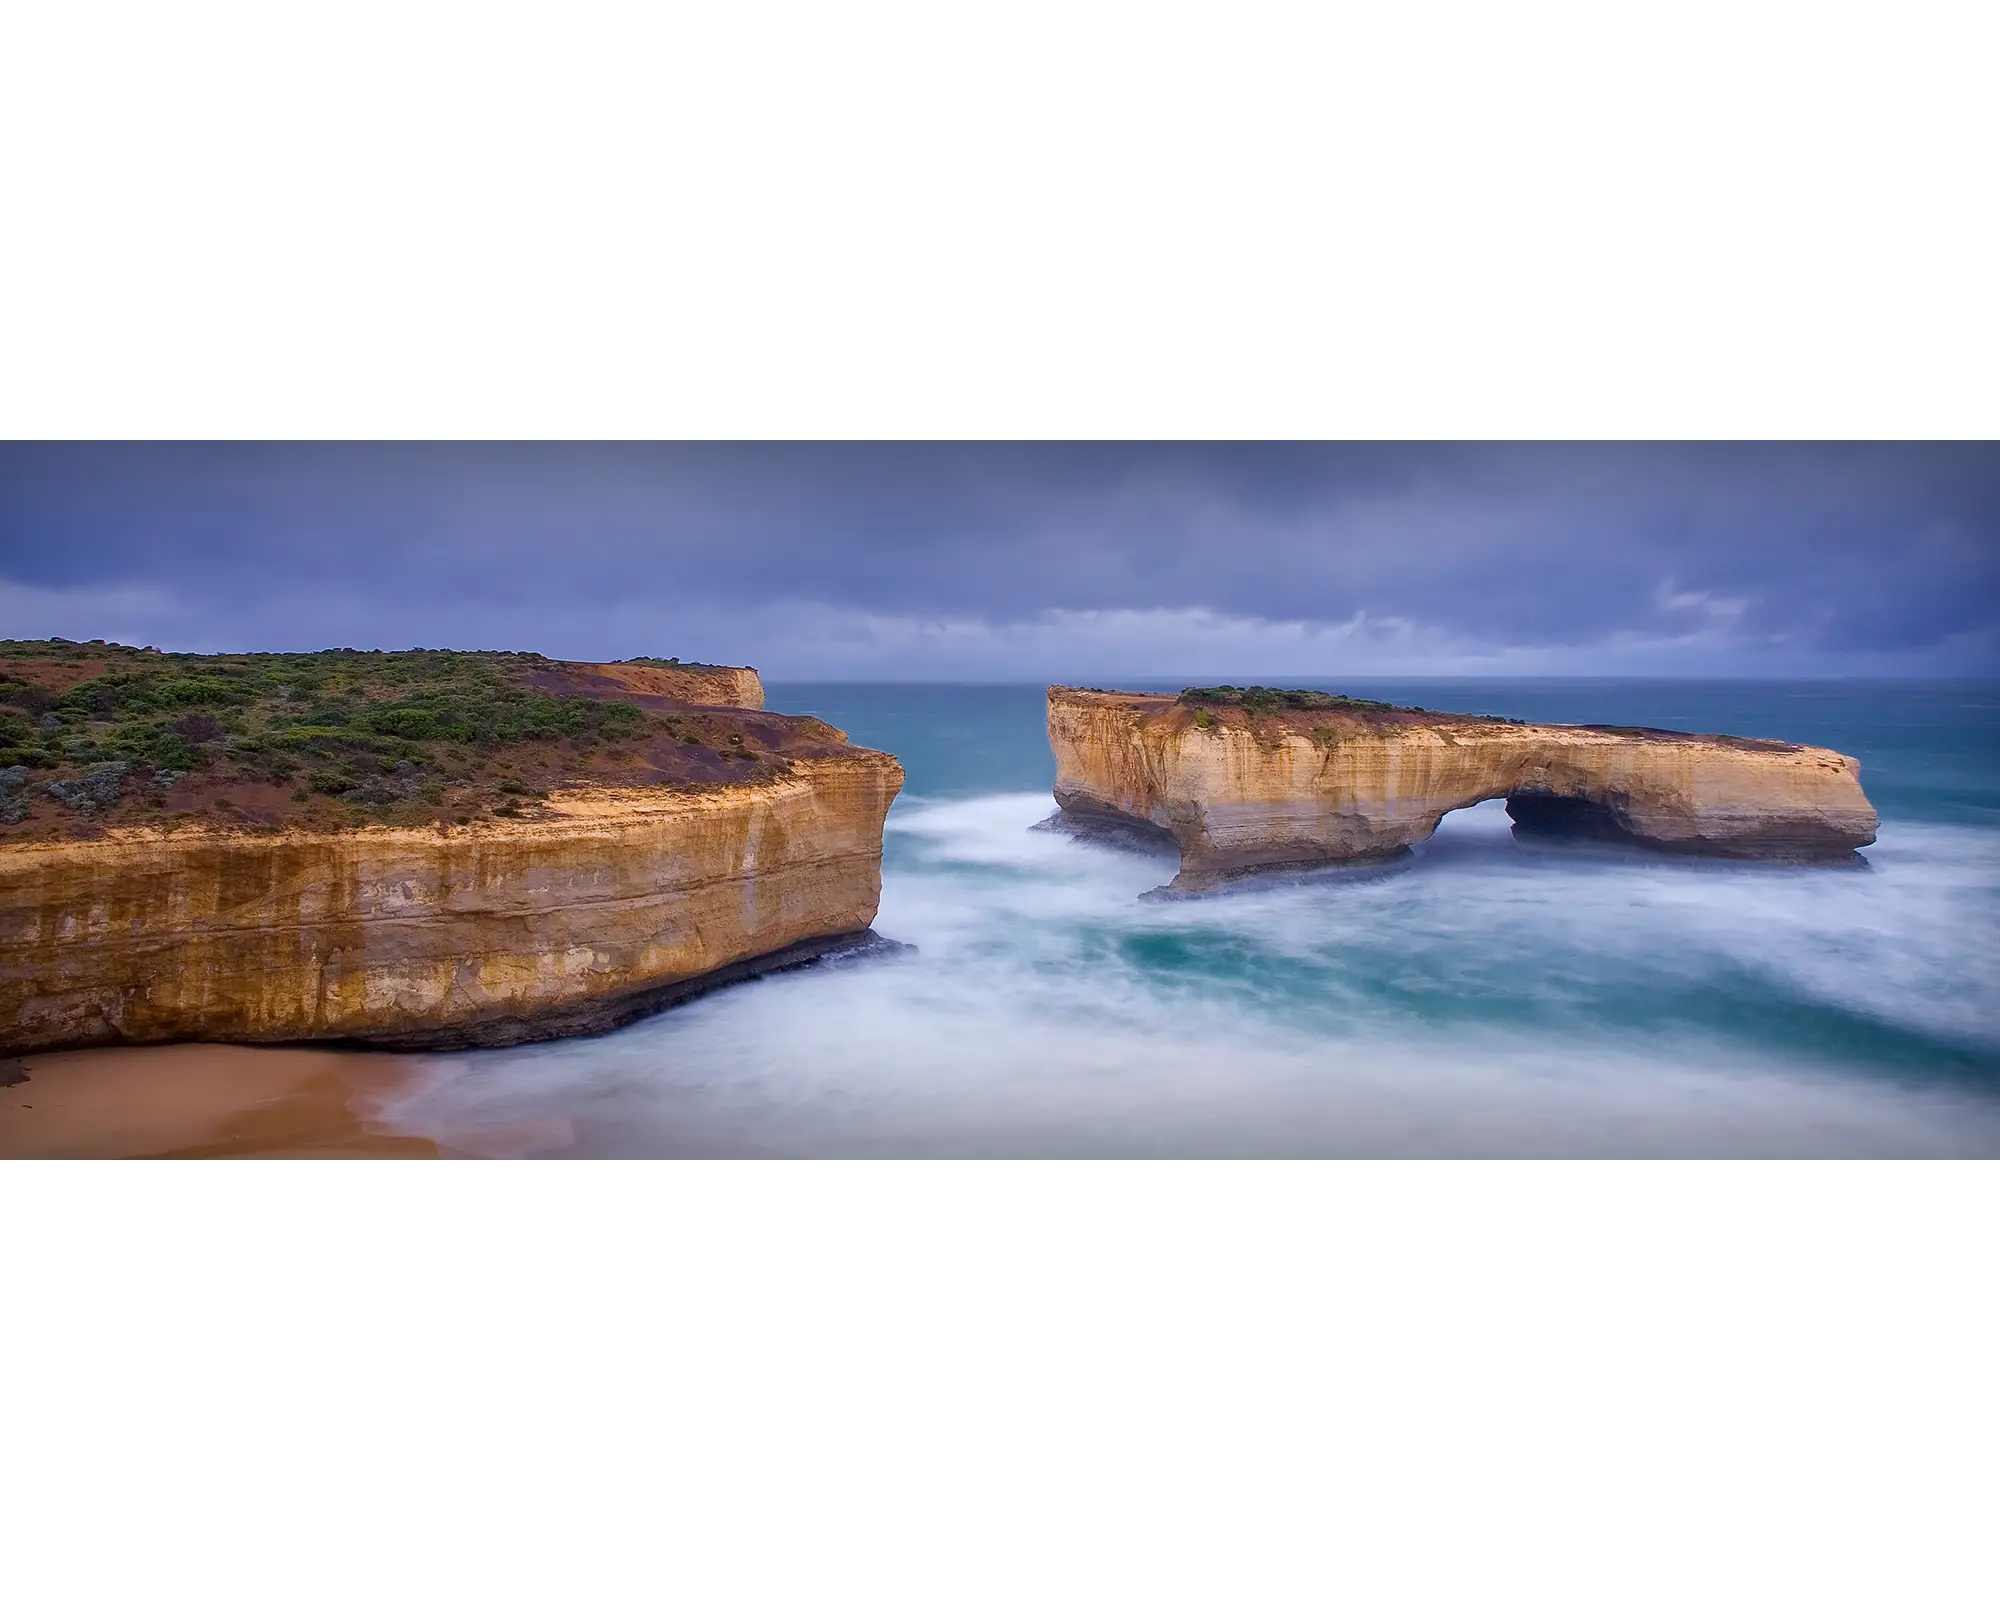 Rough waters and stormy skies over London Arch, Port Campbell National Park, Victoria. 